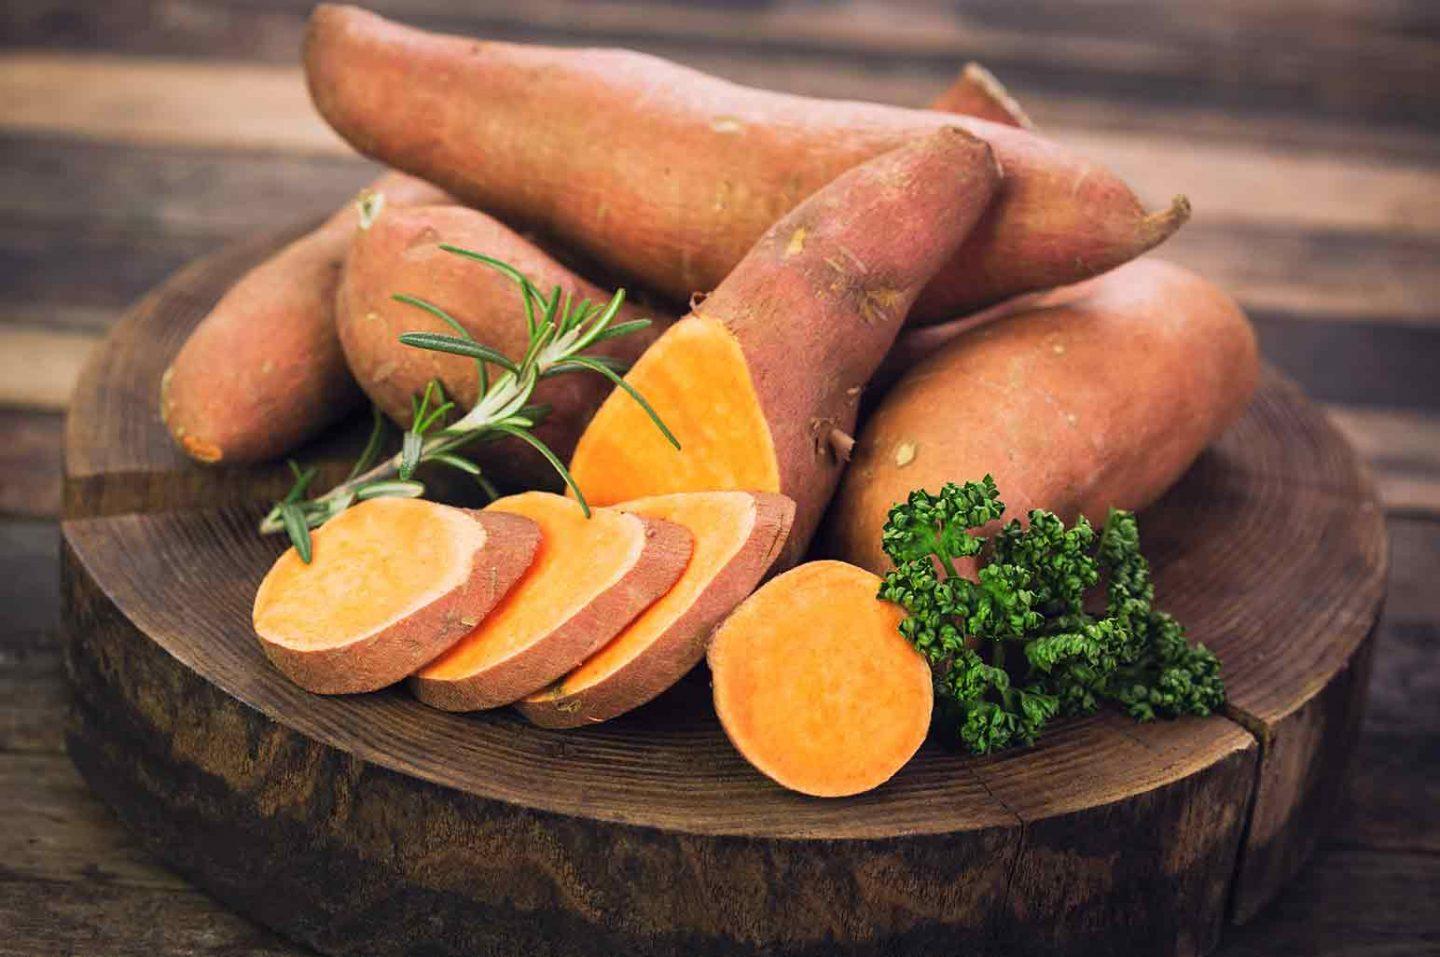 Reasons Why Sweet Potatoes Are Good For You